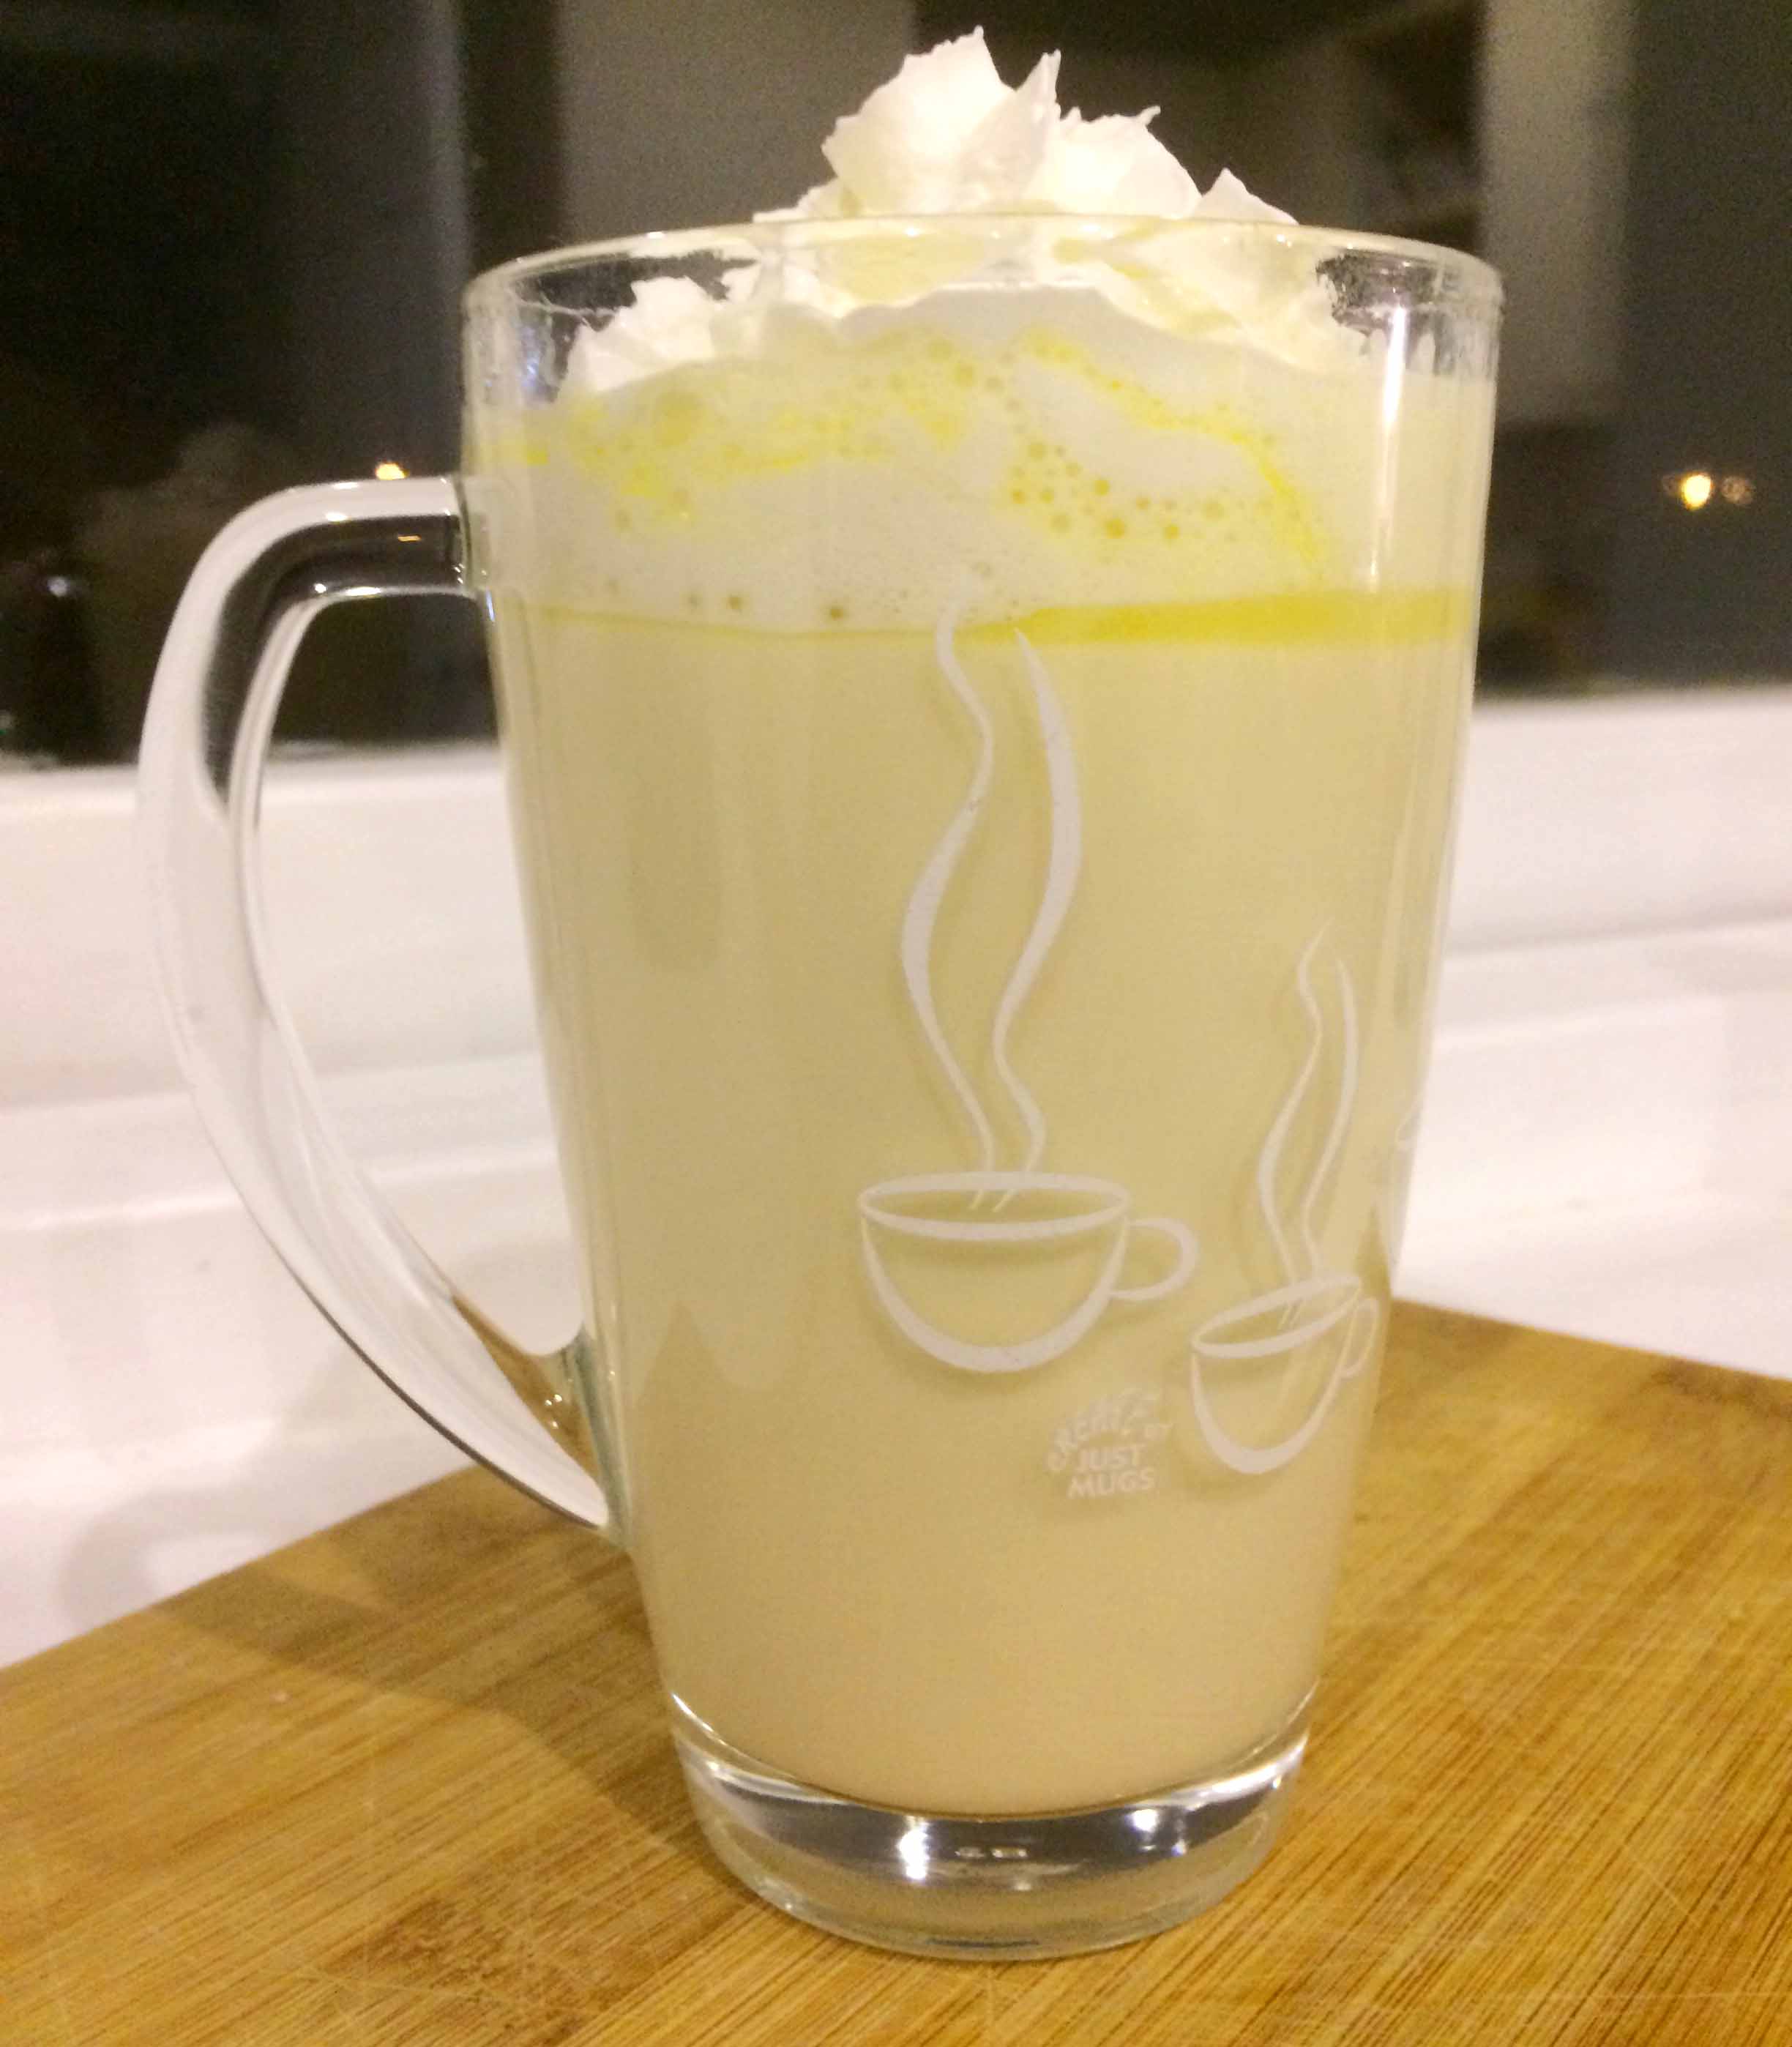 Valencia Orange White Hot Chocolate served with whipped cream, served in a clear glass mug.